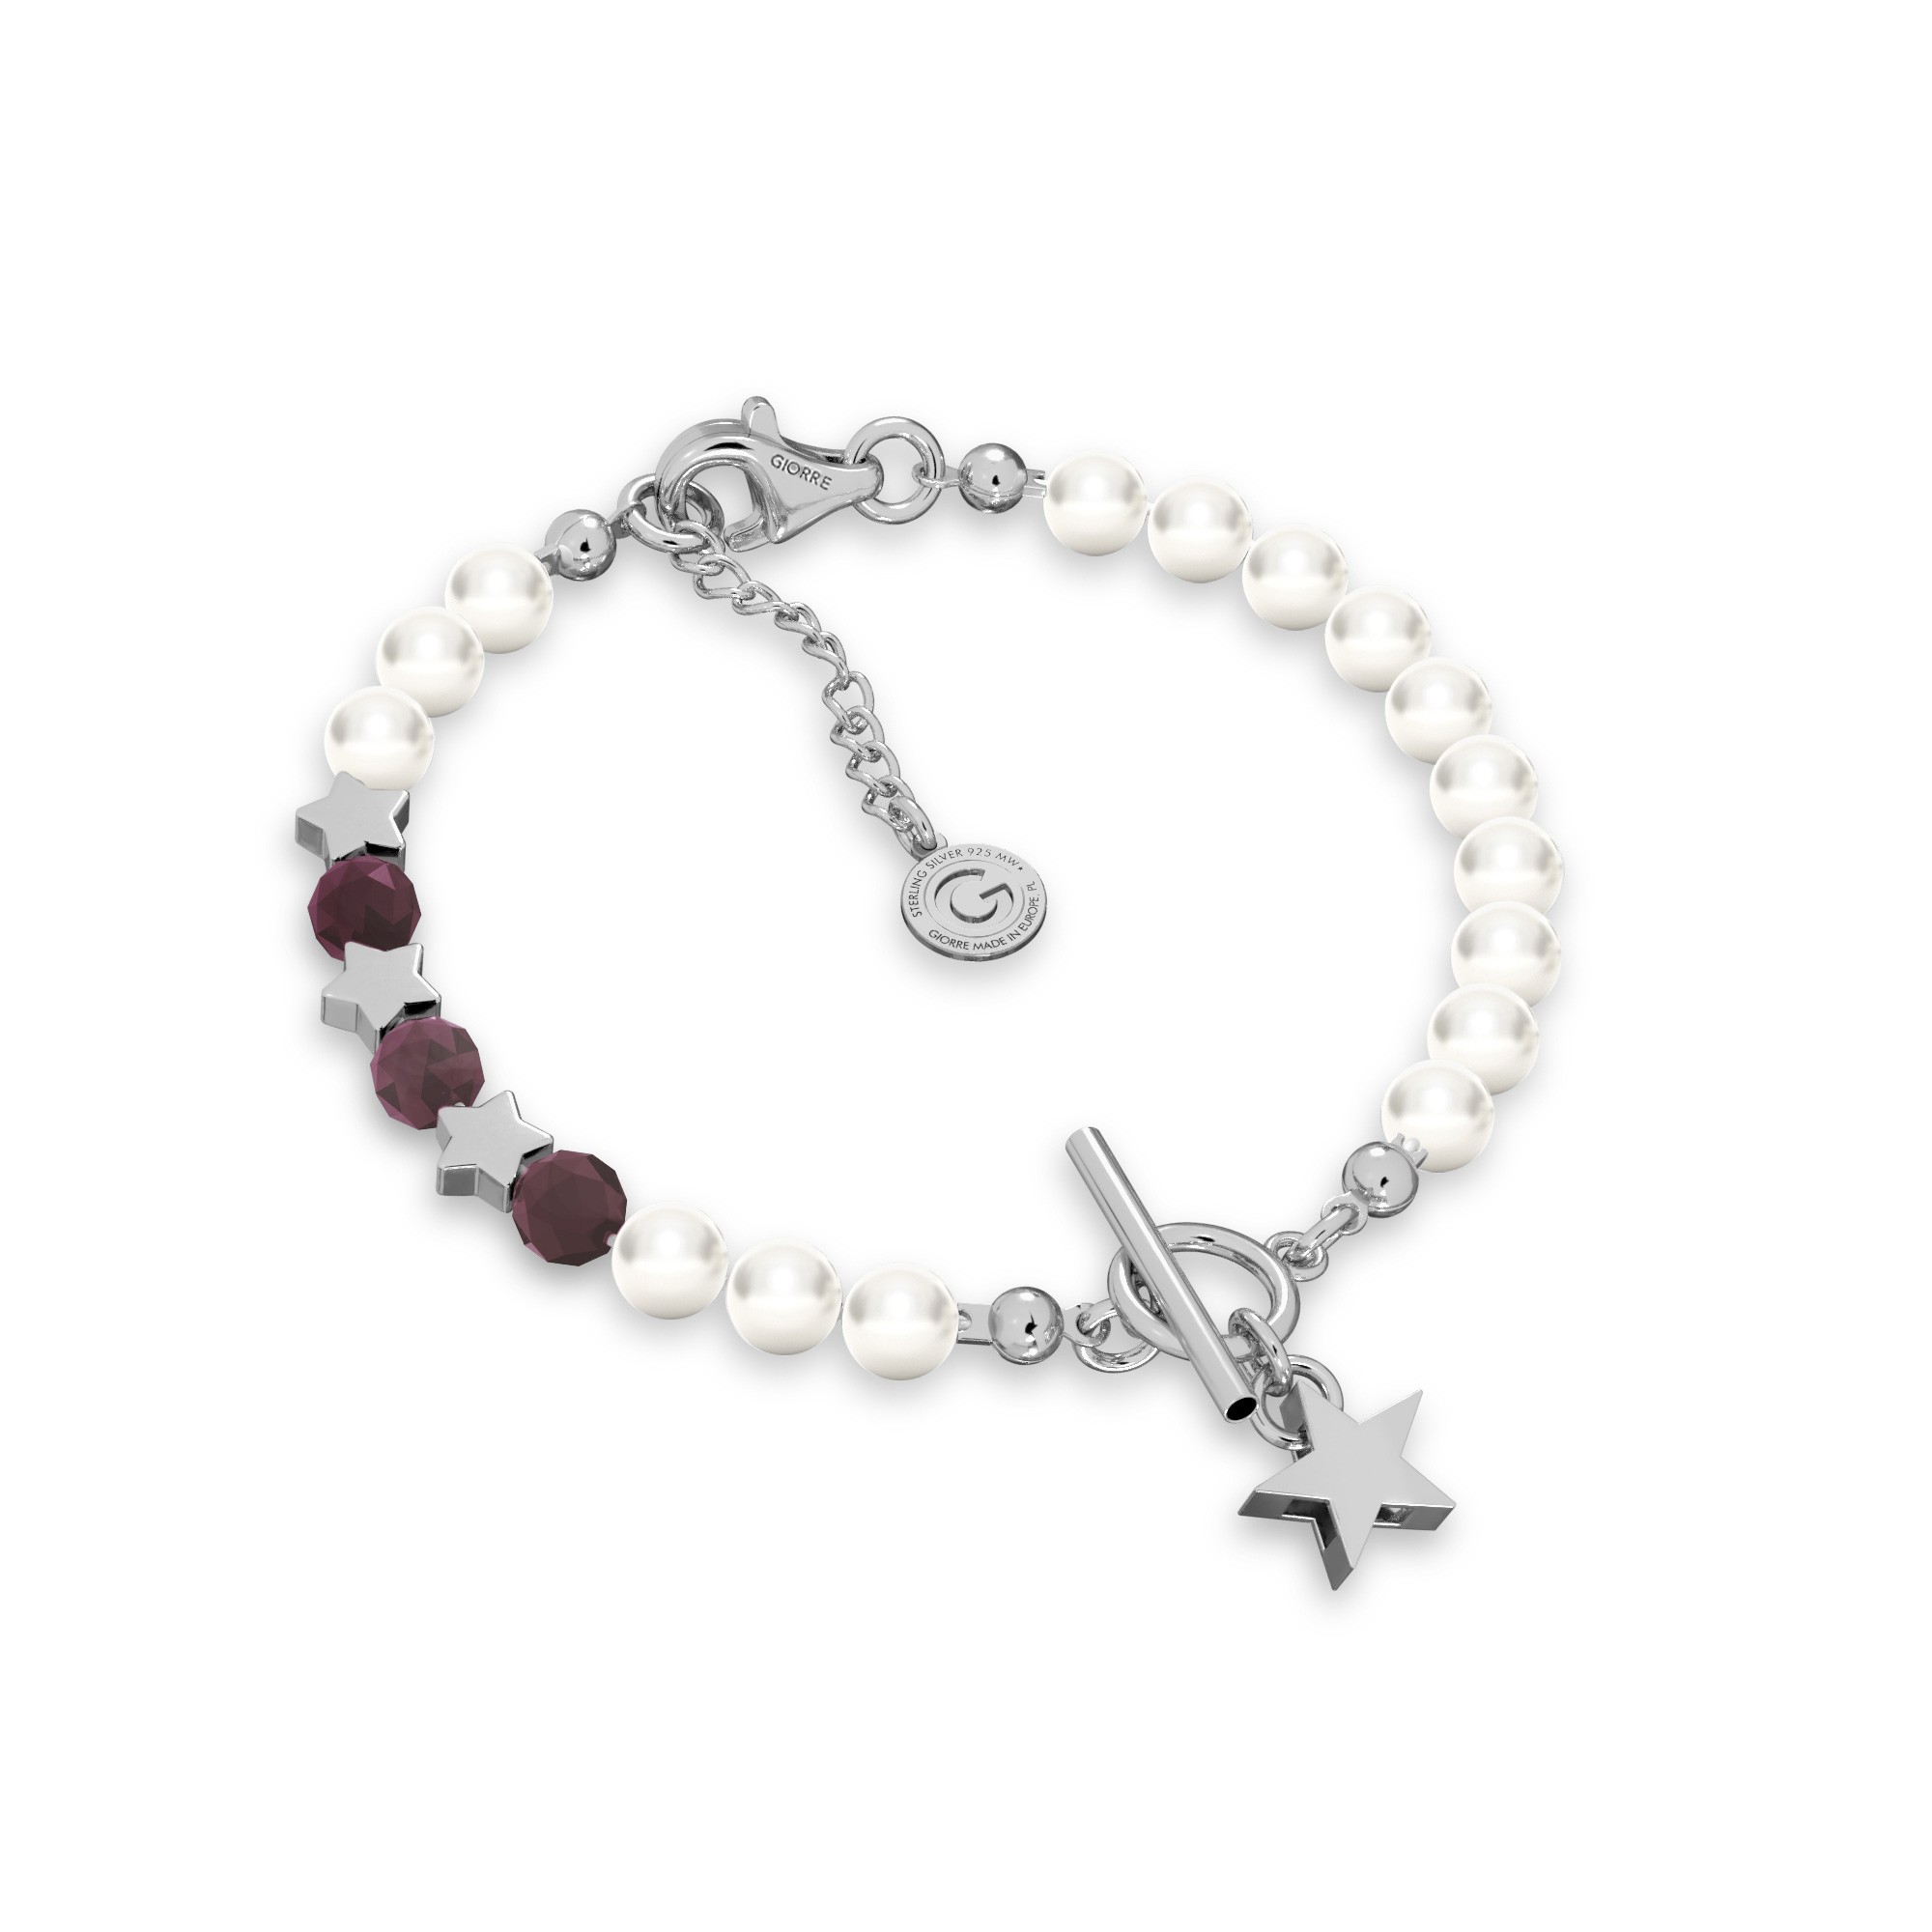 Ruby pearl bracelet with stars, sterling silver 925